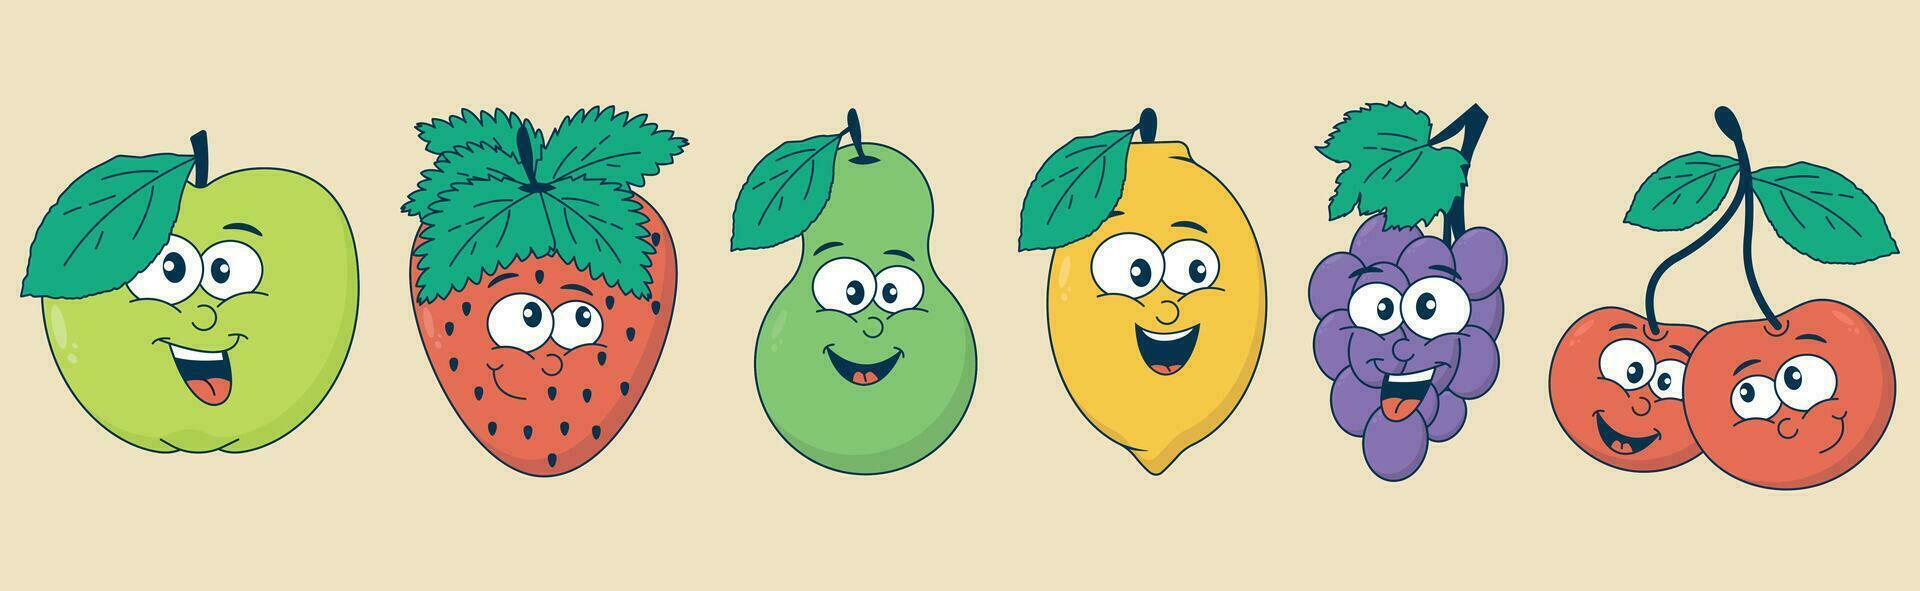 Fruit retro cartoon characters in cartoon style. Comic mascot cherry, strawberry, grape, lemon, apple, pear. Happy faces. Groovy summer vector illustration in 90s style.